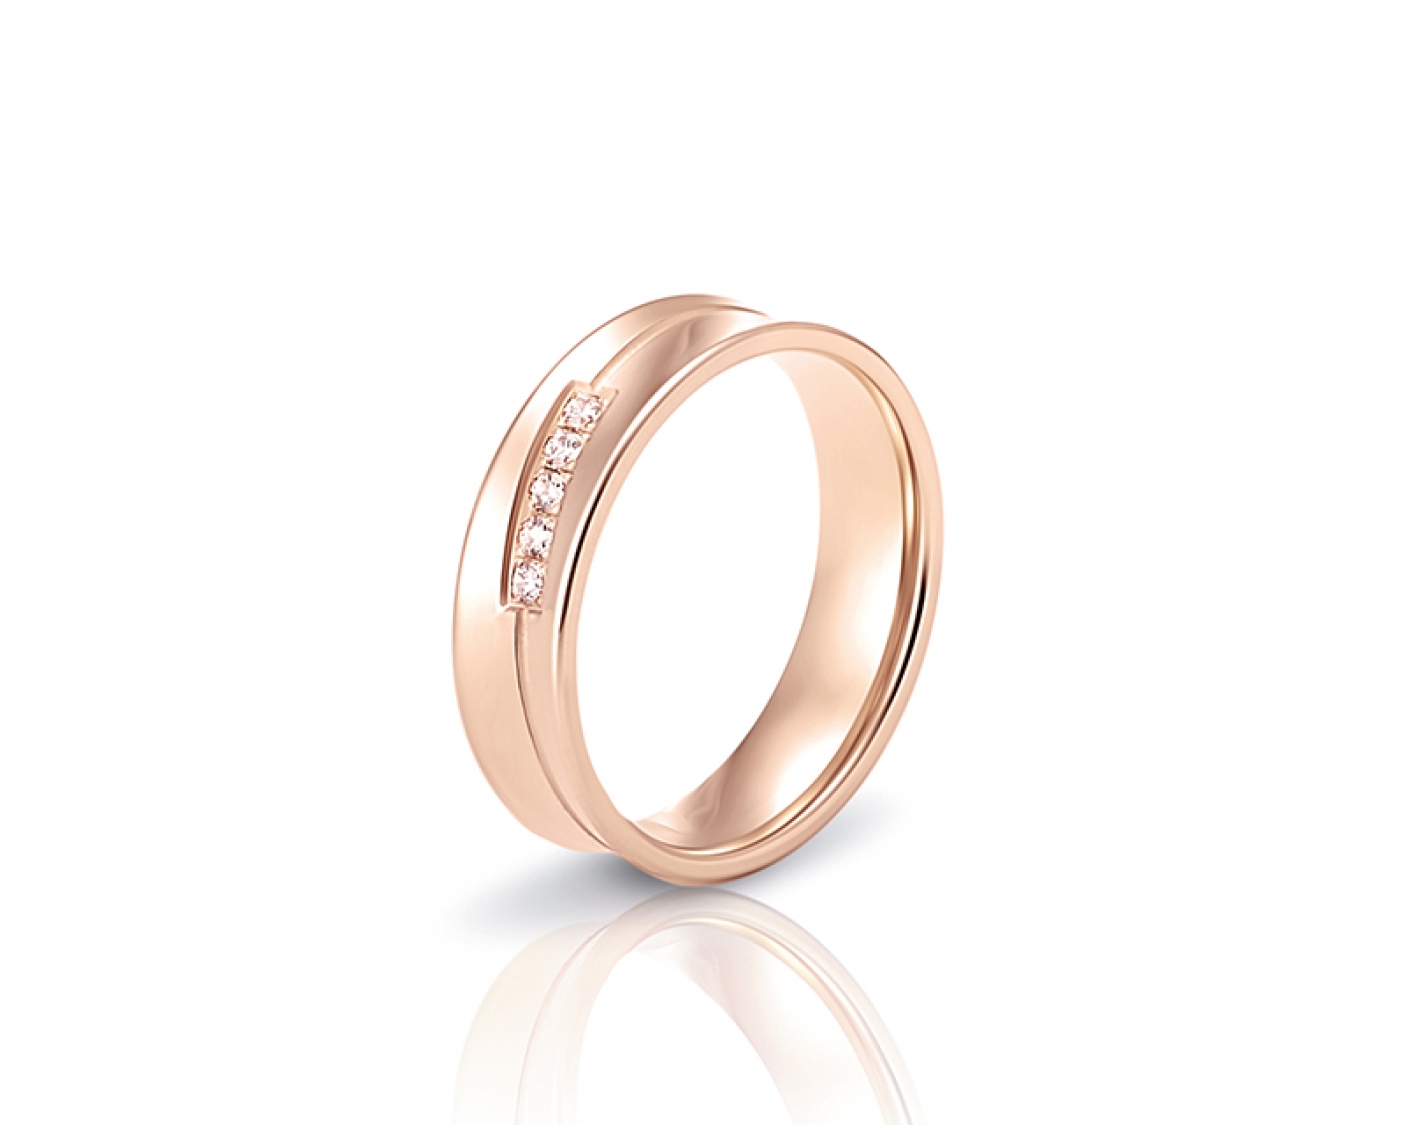 18k rose gold 5,5mm wedding band with diamonds Photos & images